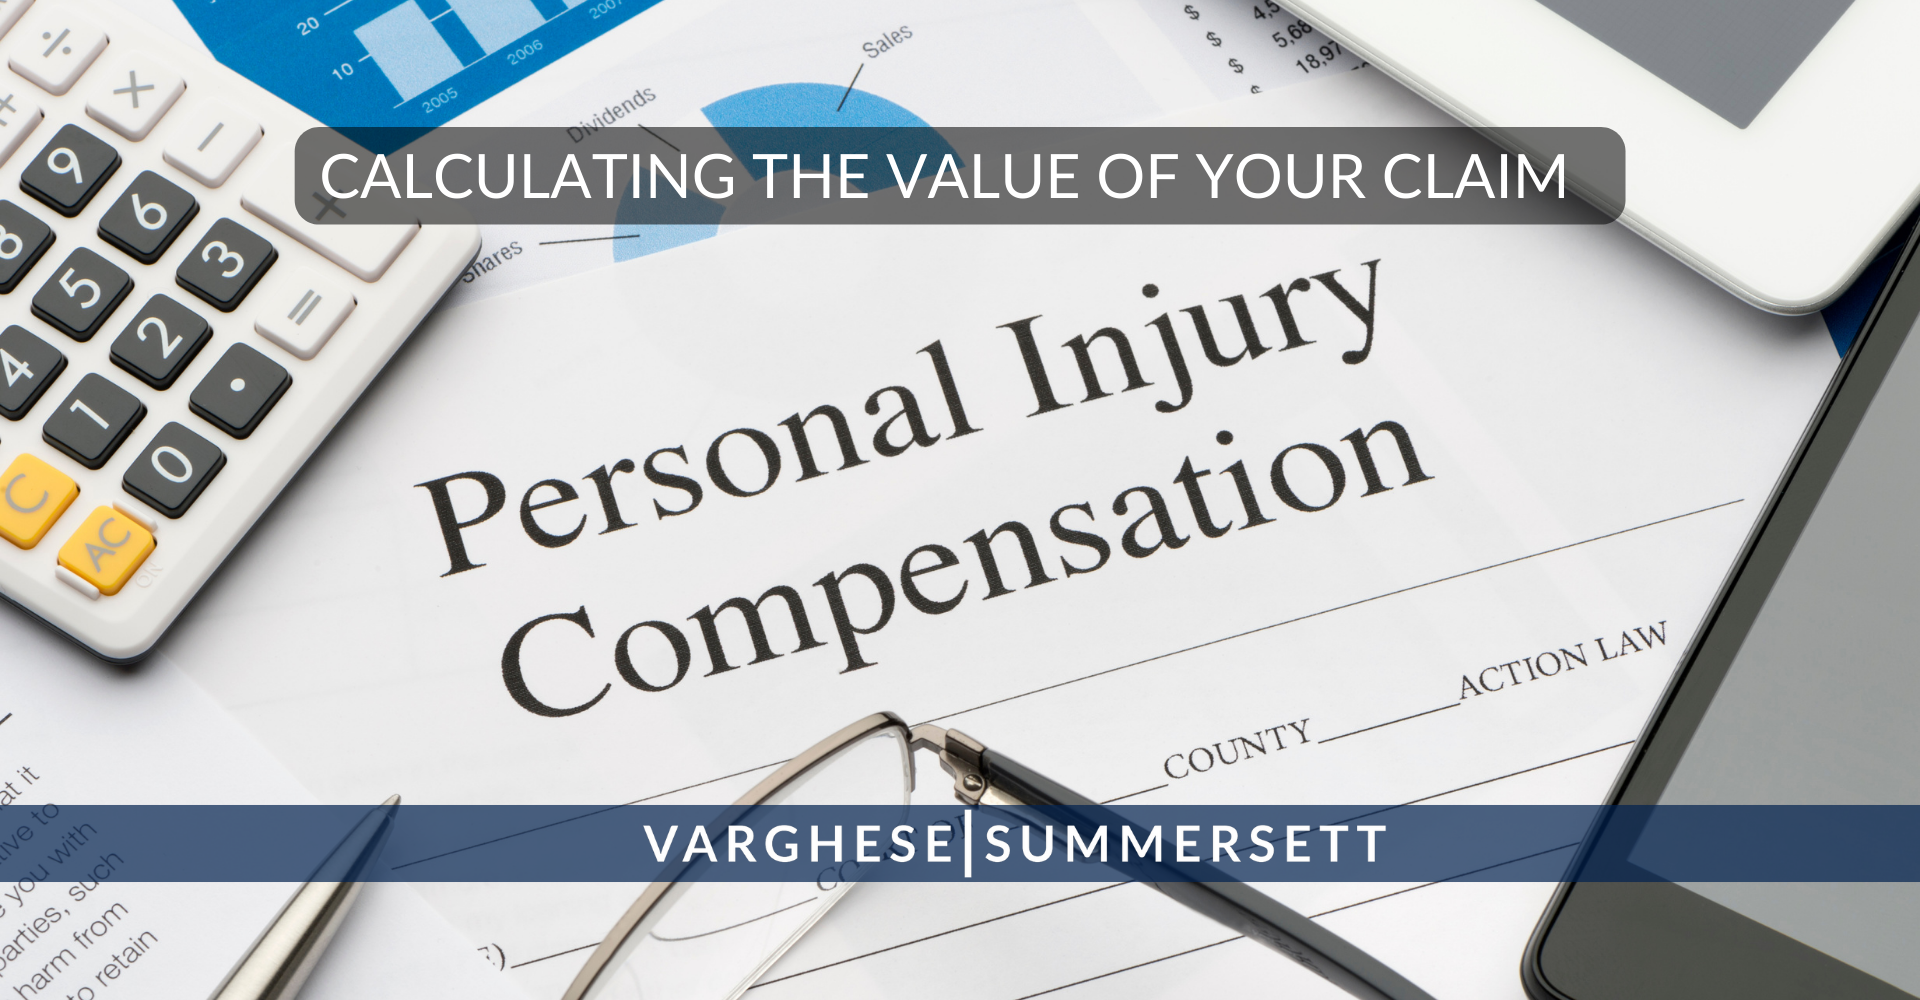 Calculating the value of your claim